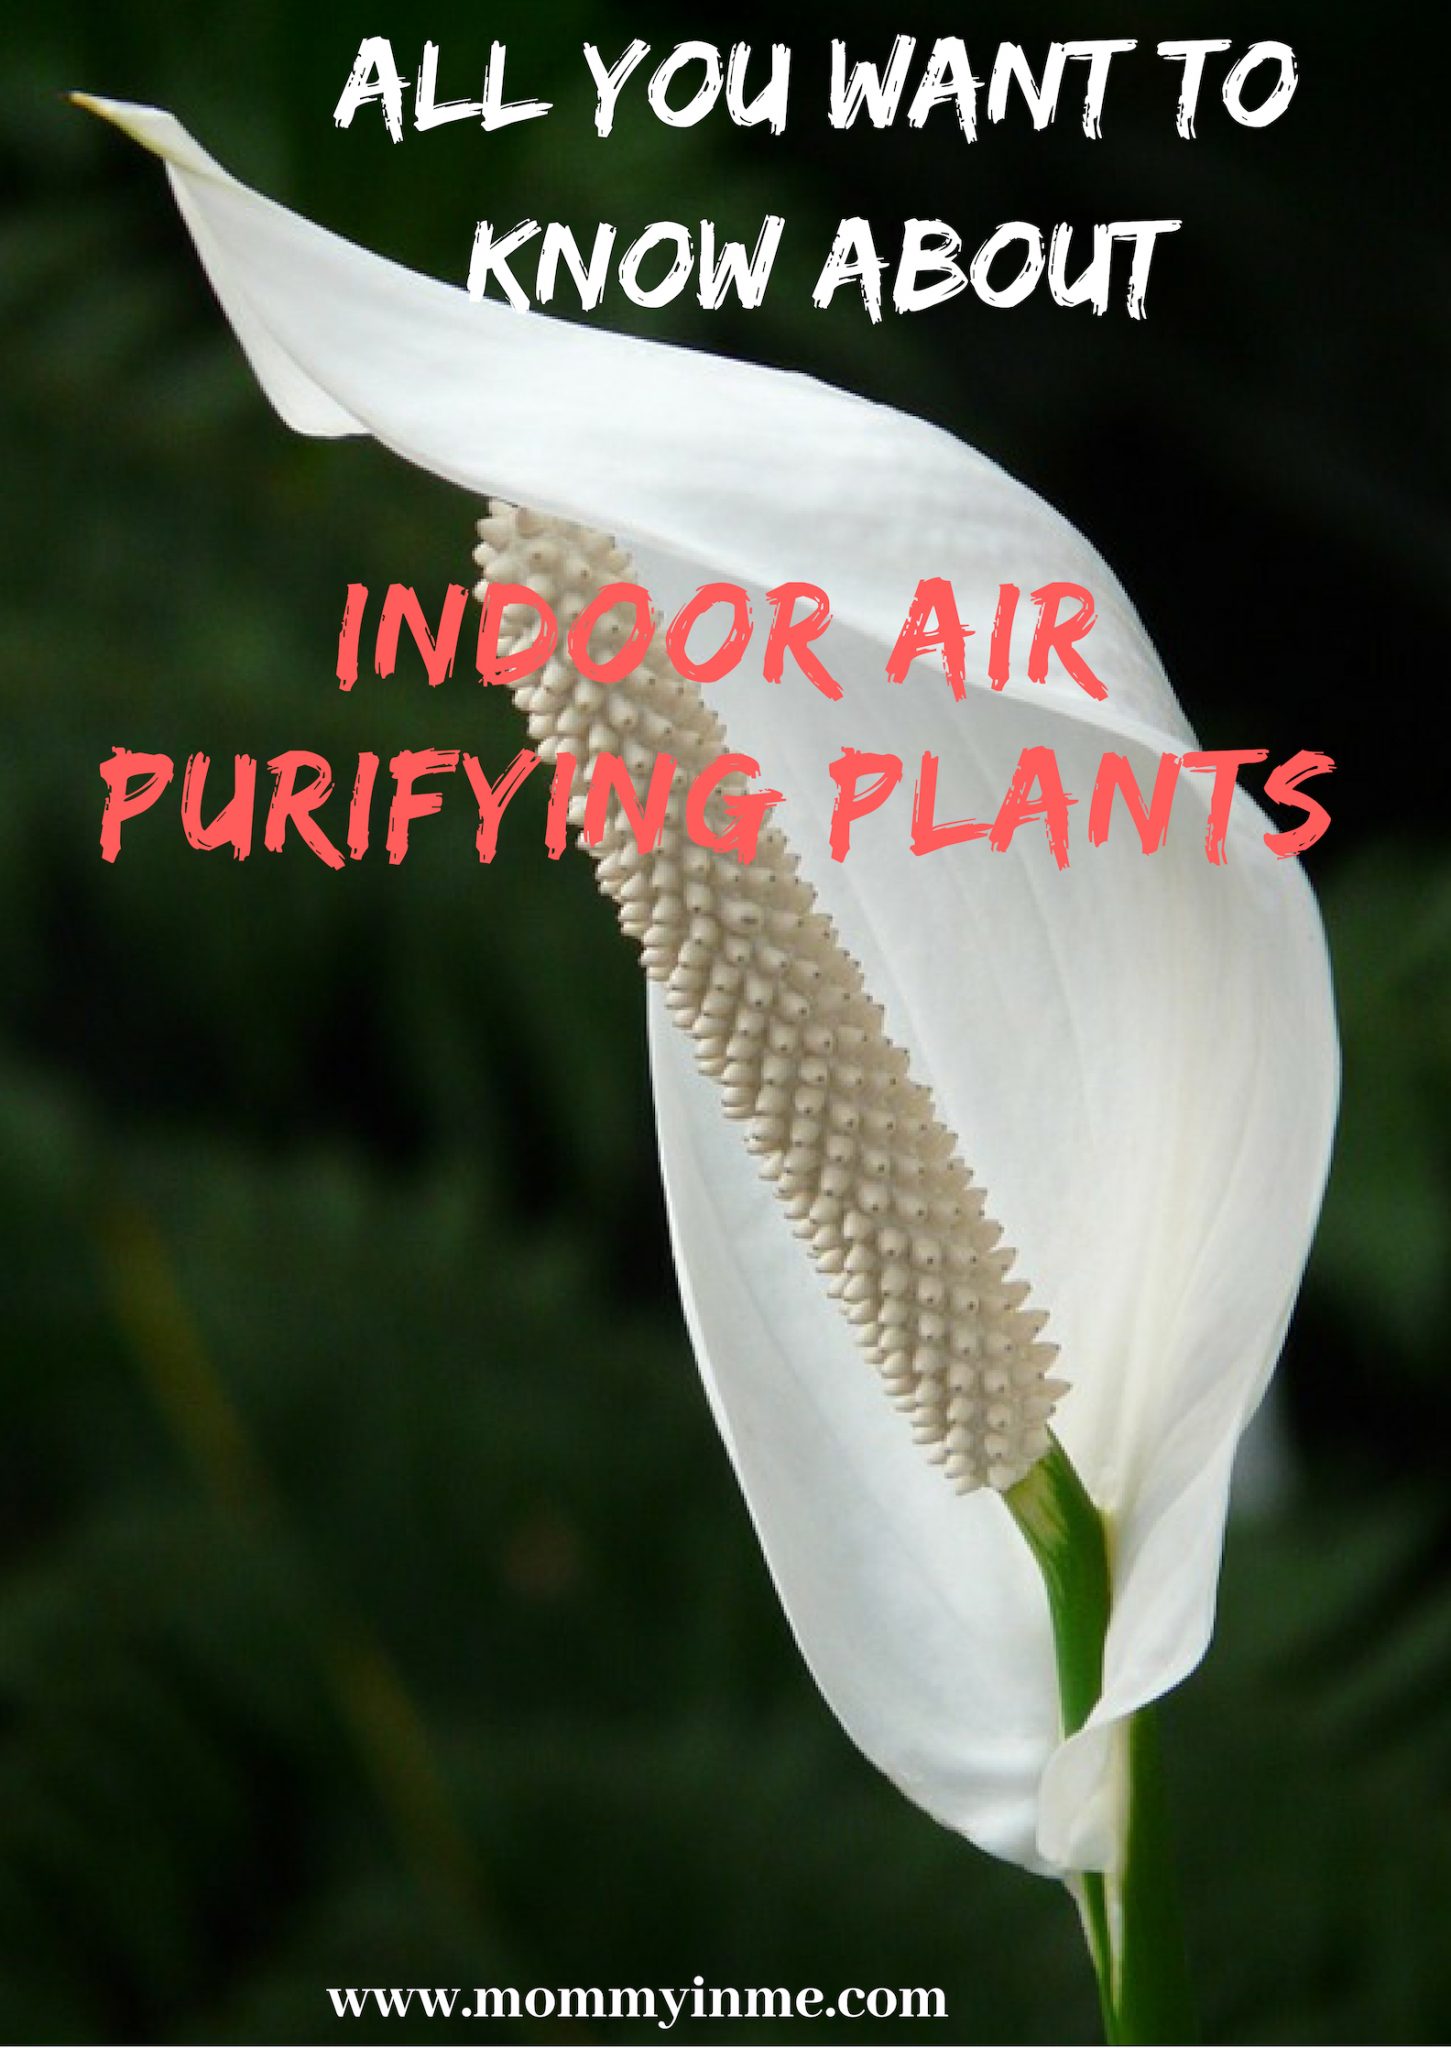 Delhi's Air Pollution has given a new reach for plants. Since Indoor Air Pollution can be 5X more than outdoors, here are some Air Purifying Plants for home. #airpurifyingplants #indoorplants #airpollution #plants #Delhi #DelhiAir